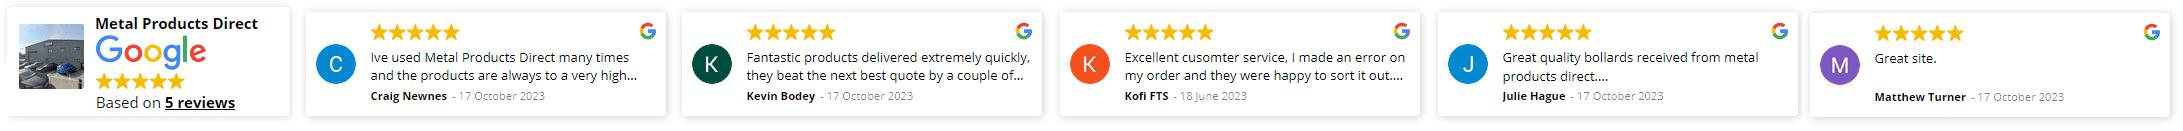 metal products direct google review banner